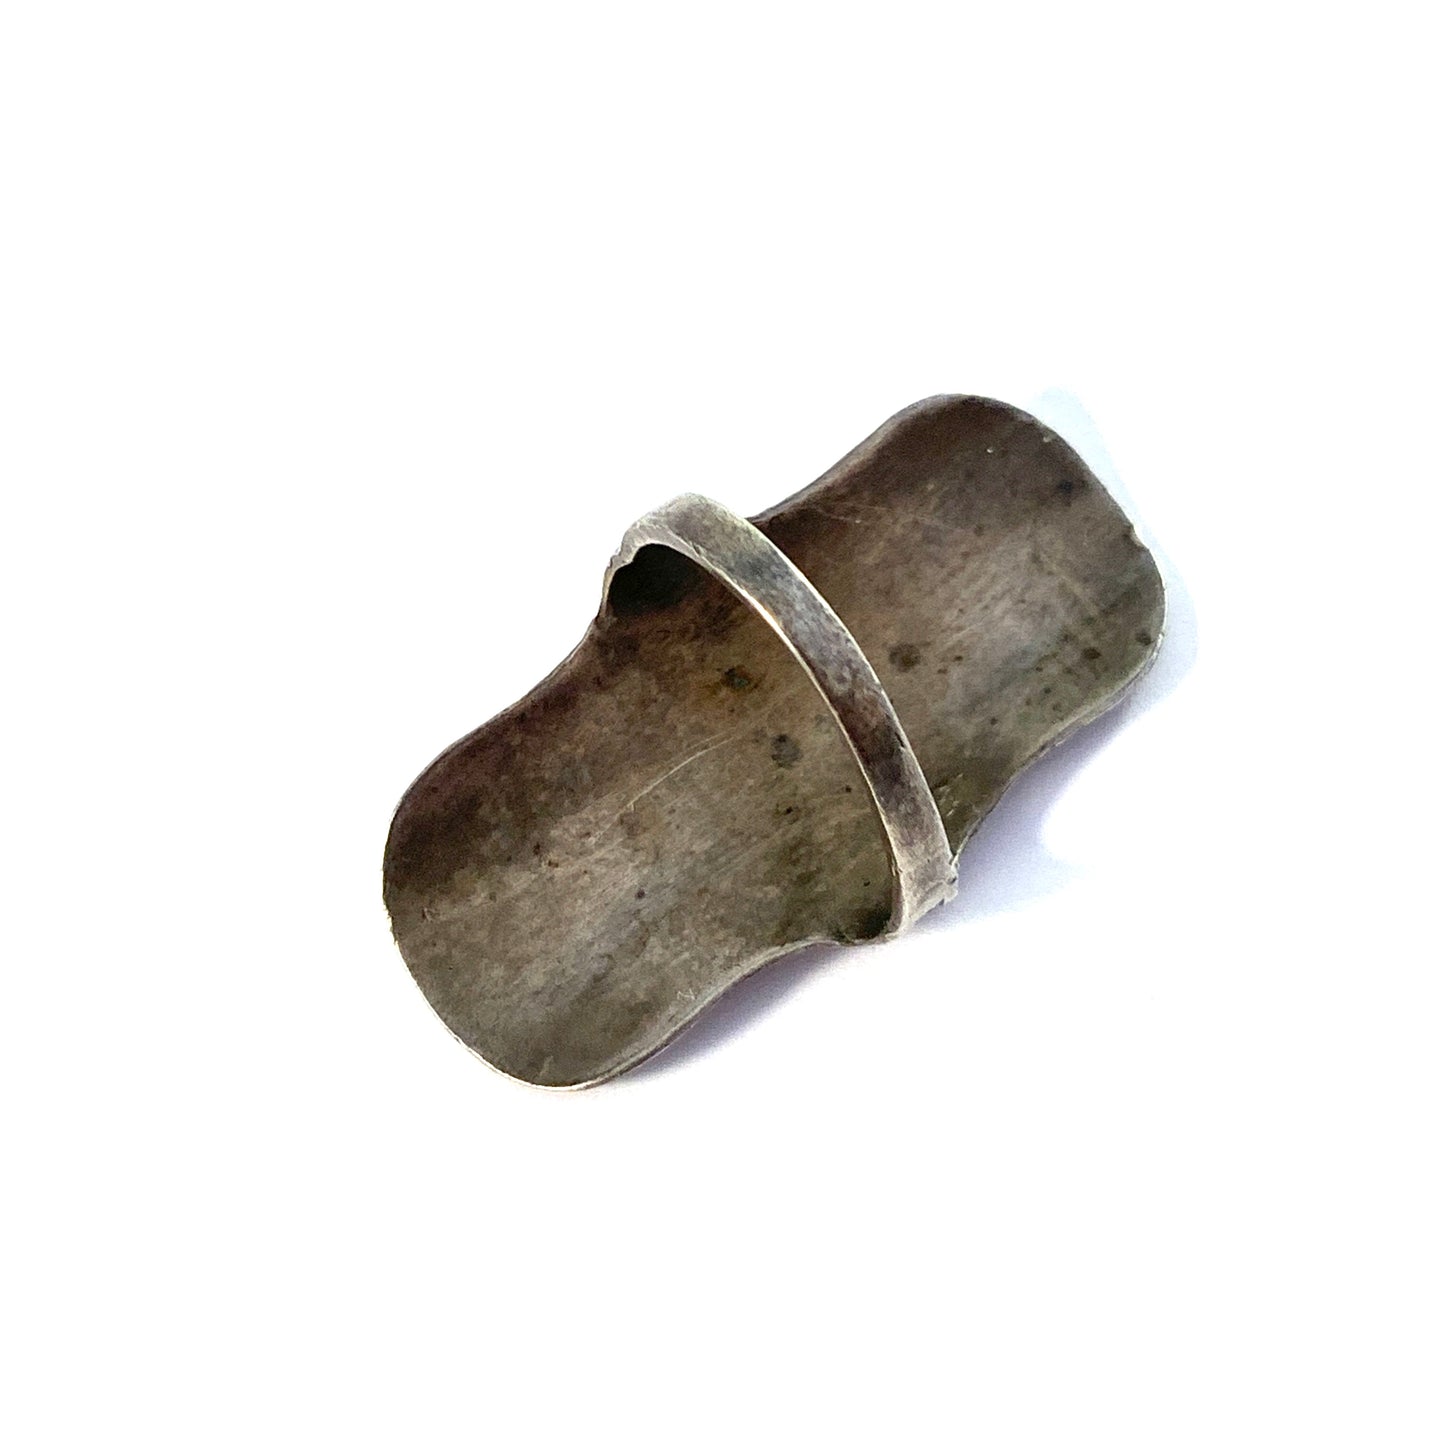 Sweden year 1857. Antique Silver Thimble Ring.